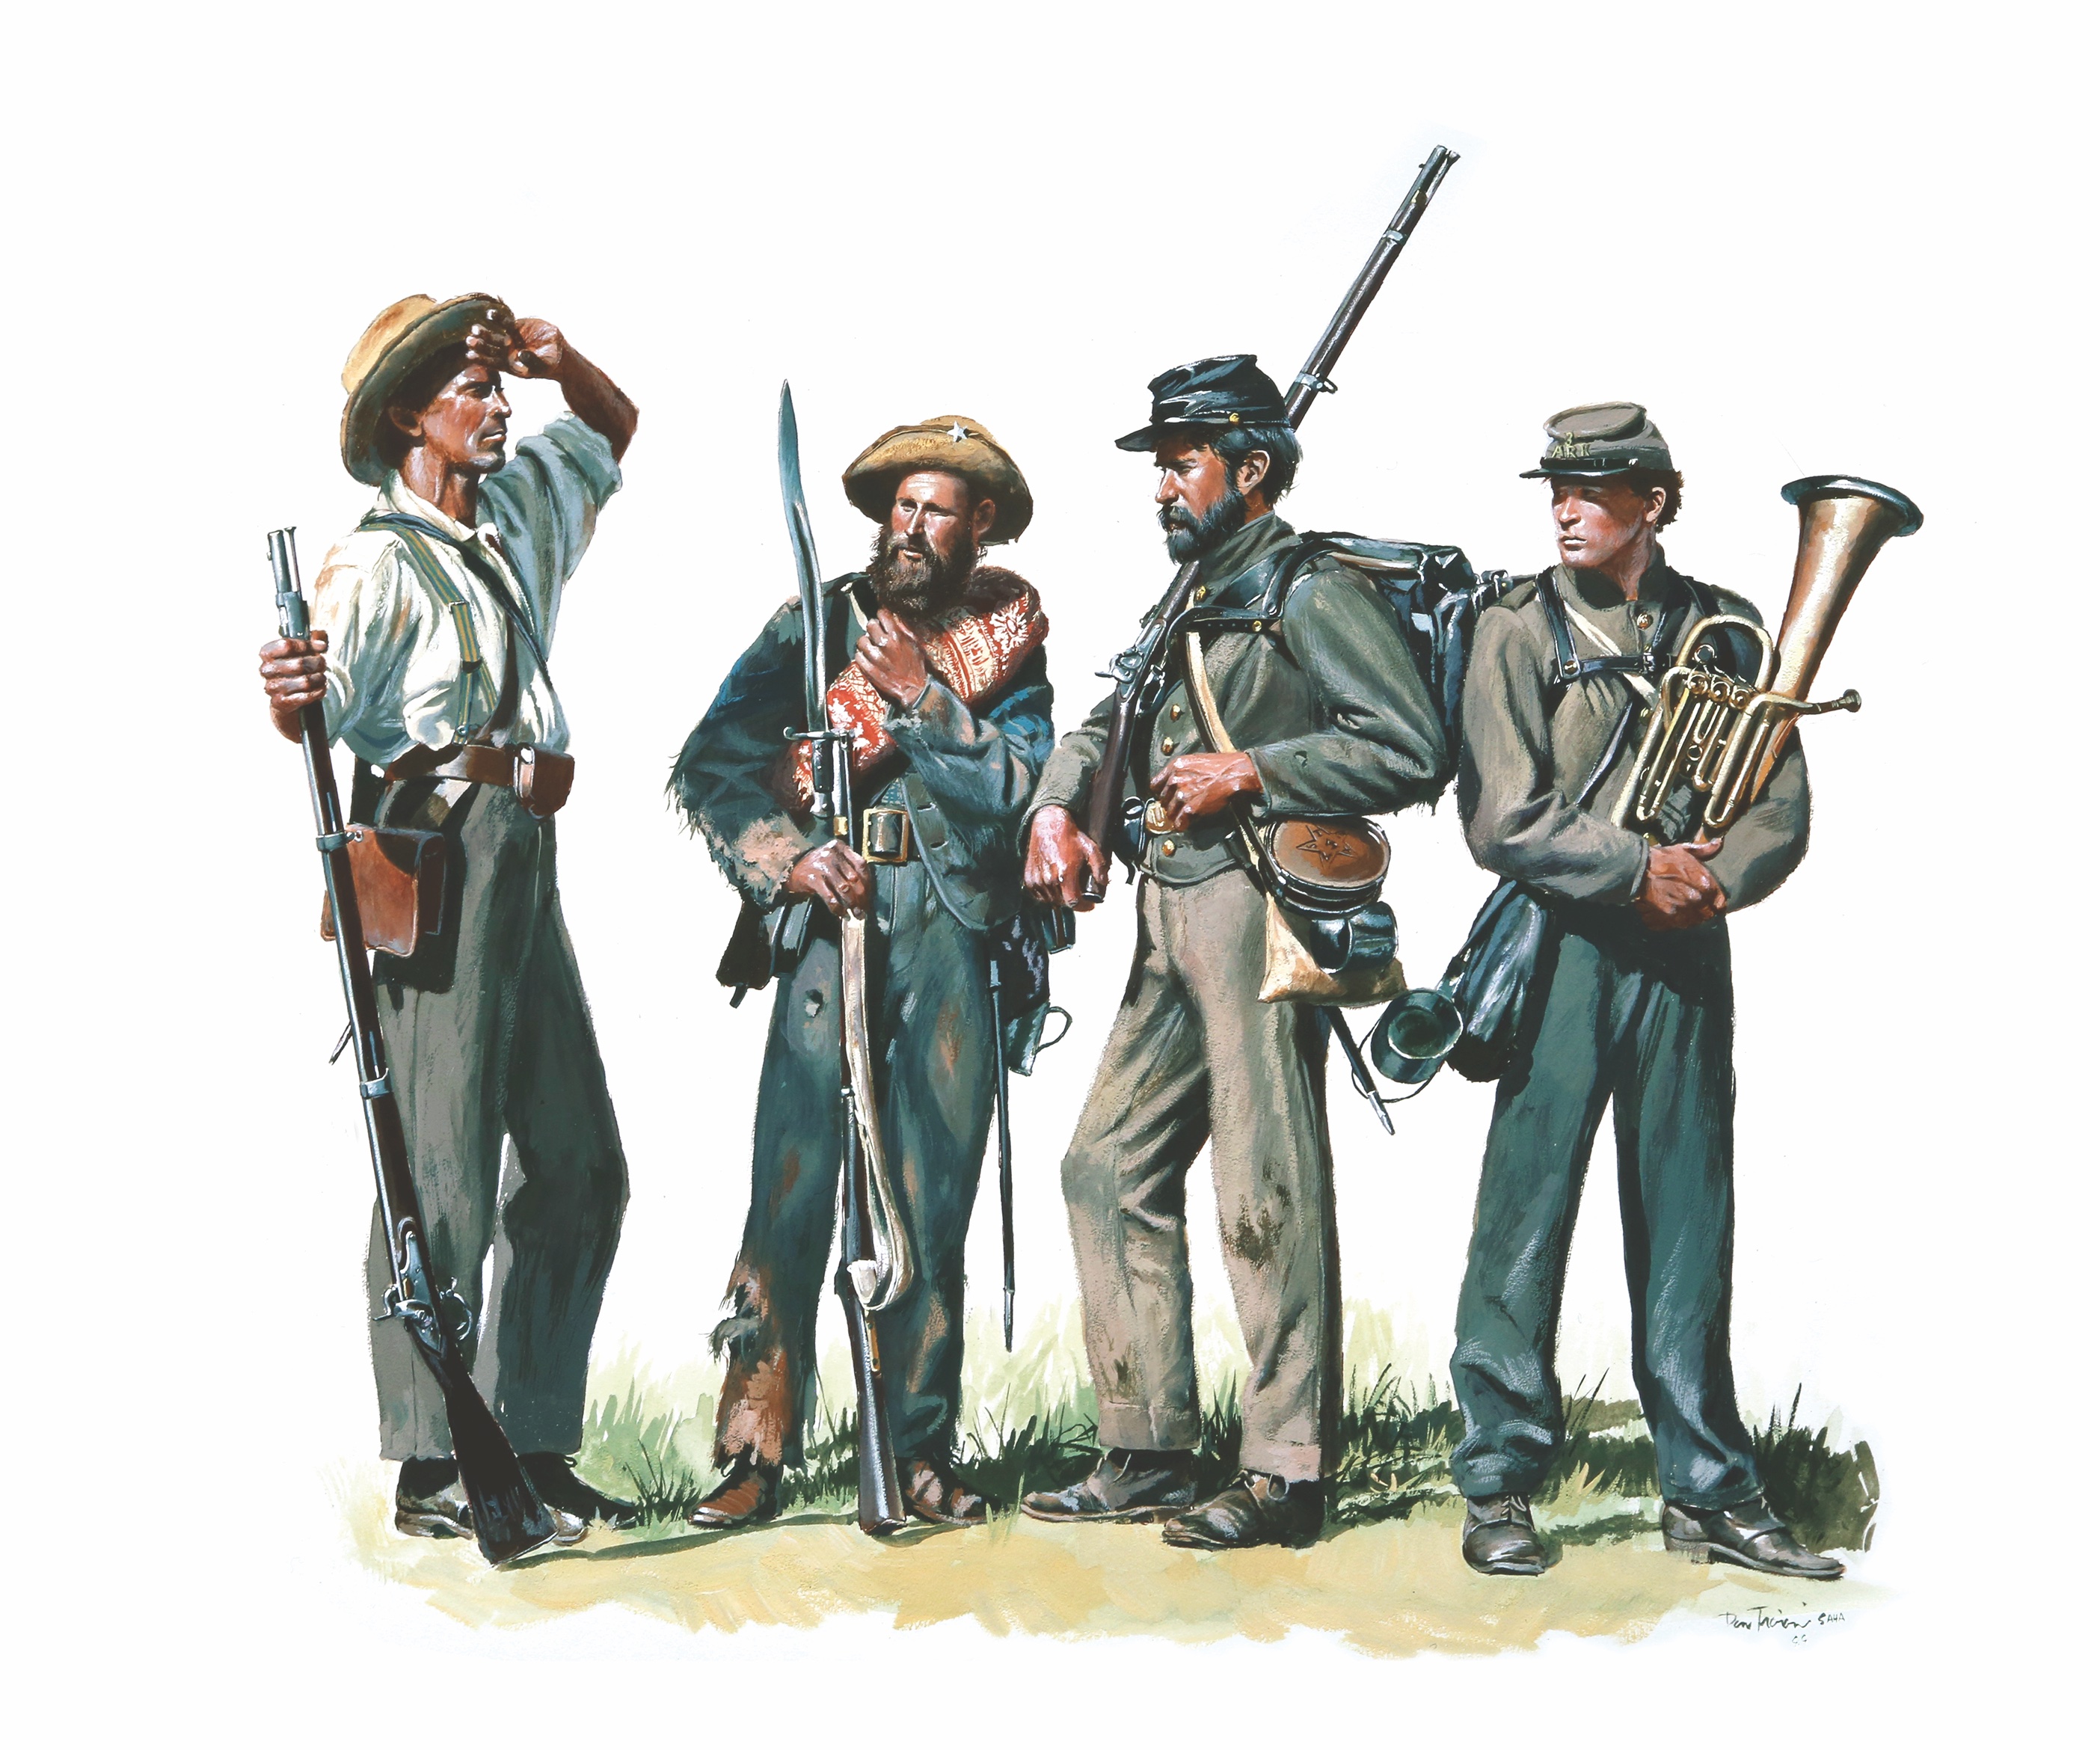 This vignette by modern artist Don Troiani portrays men of the 1st, 4th, 5th Texas, and 3rd Arkansas (also in the Texas Brigade) as they appeared during the Gettysburg Campaign. The soldier with the red blanket roll carries an English- made rifle with a sword bayonet, often issued to sergeants or corporals. The Texans always seemed to end up in hot spots. At Antietam, they fought in the Cornfield, and they charged Little Round Top at Gettysburg. 